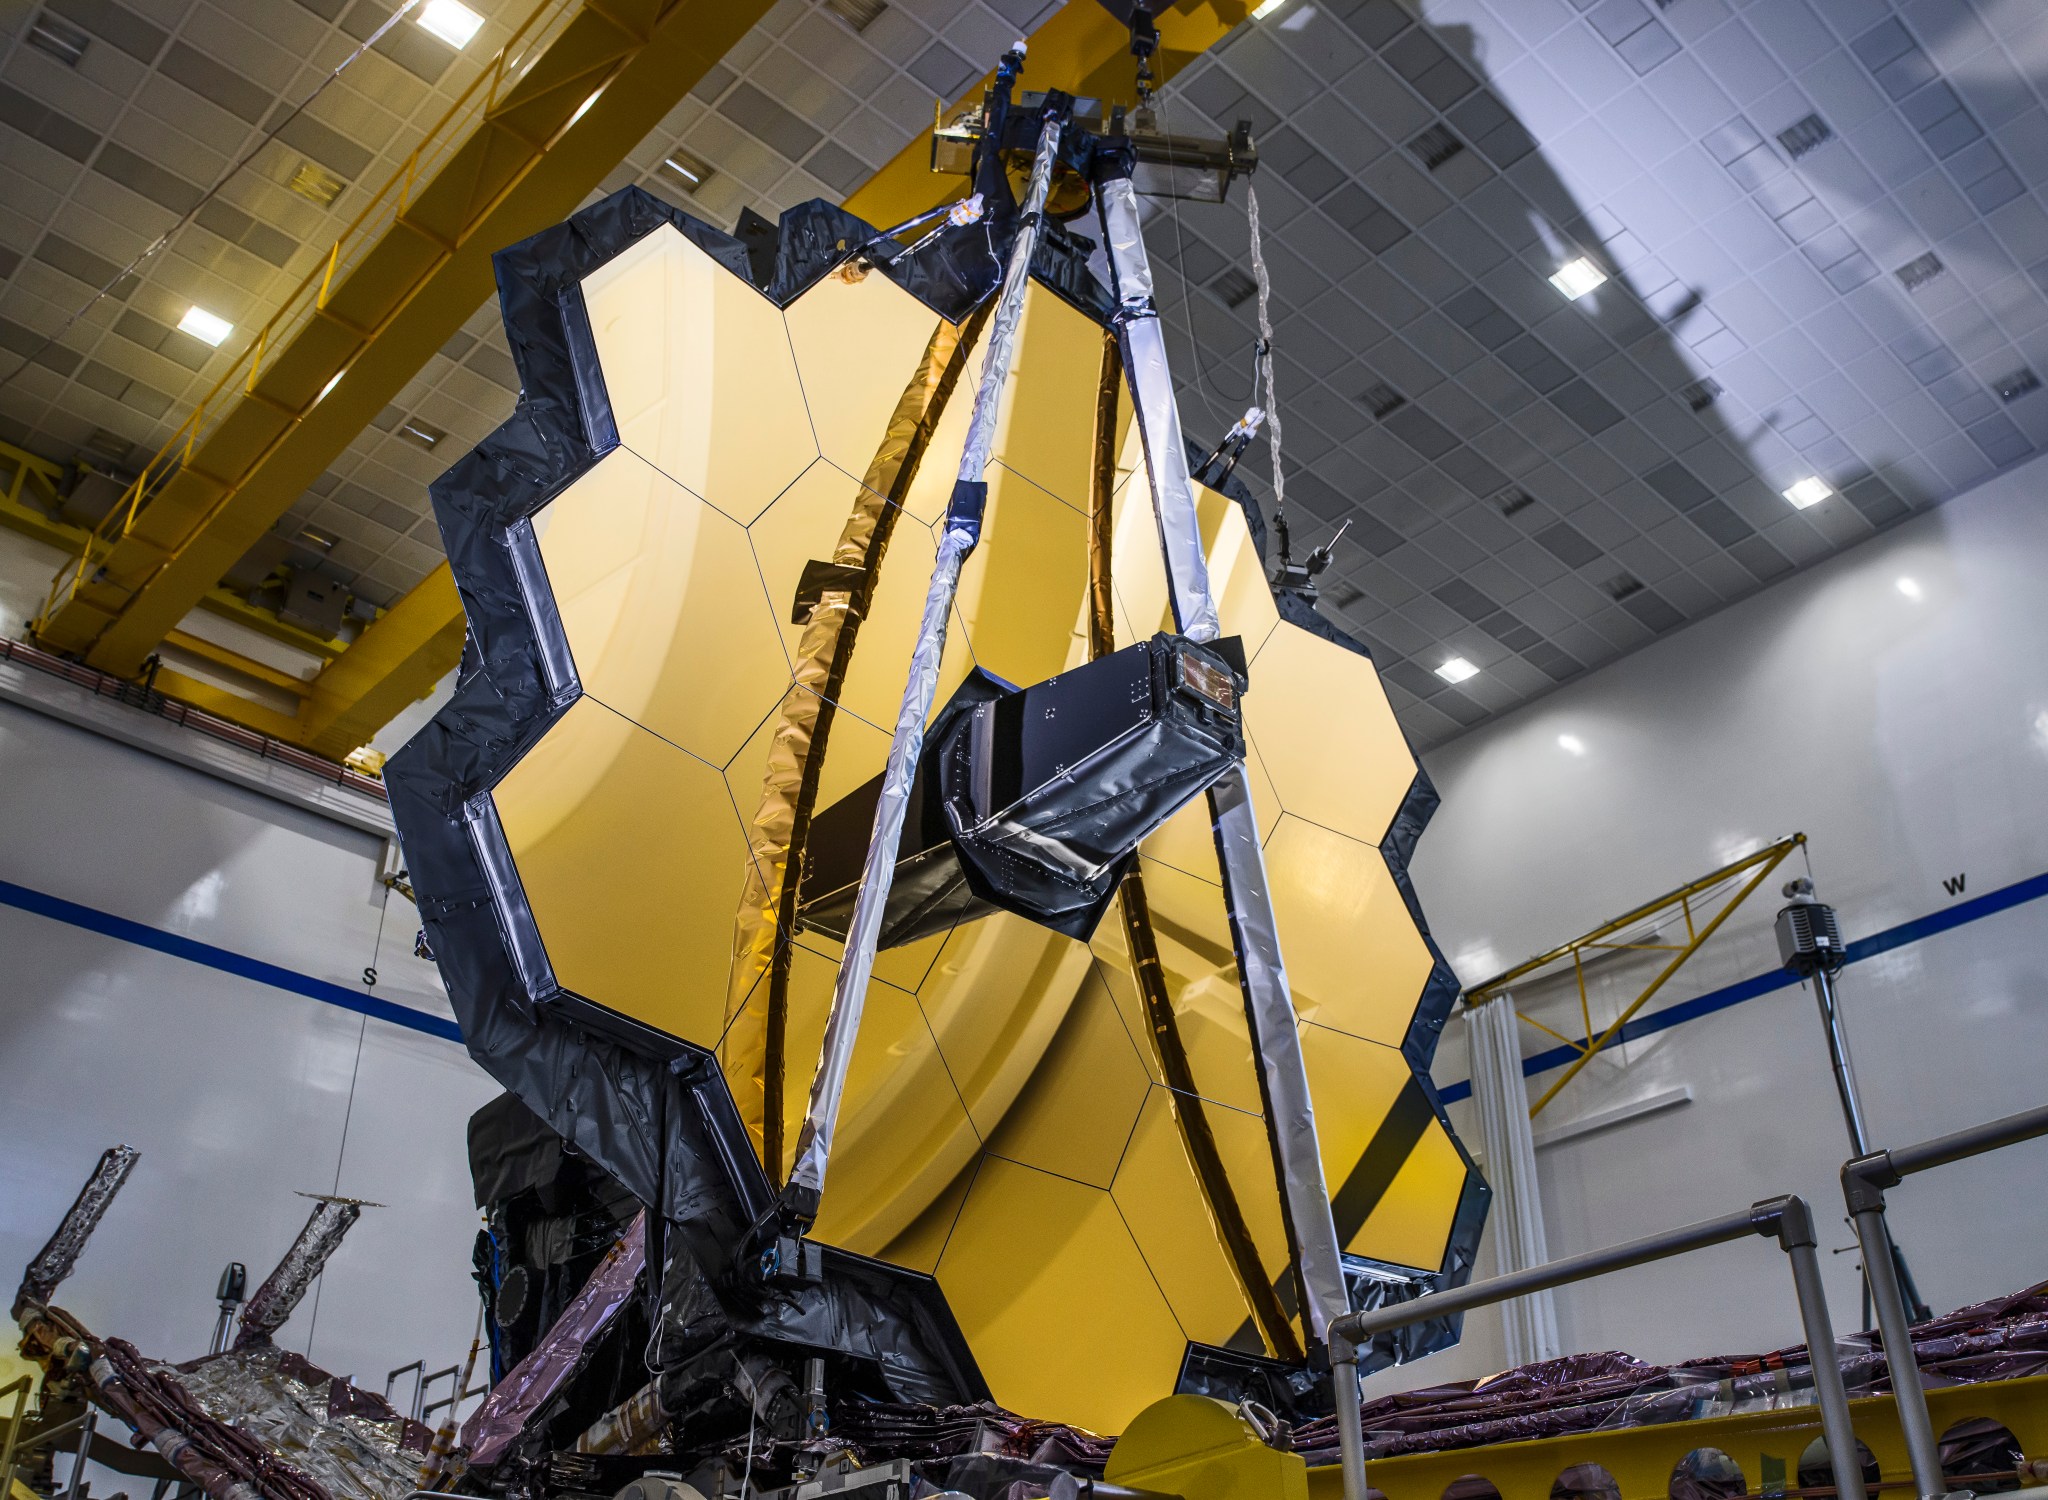 NASA’s James Webb Space Telescope, seen during construction and testing